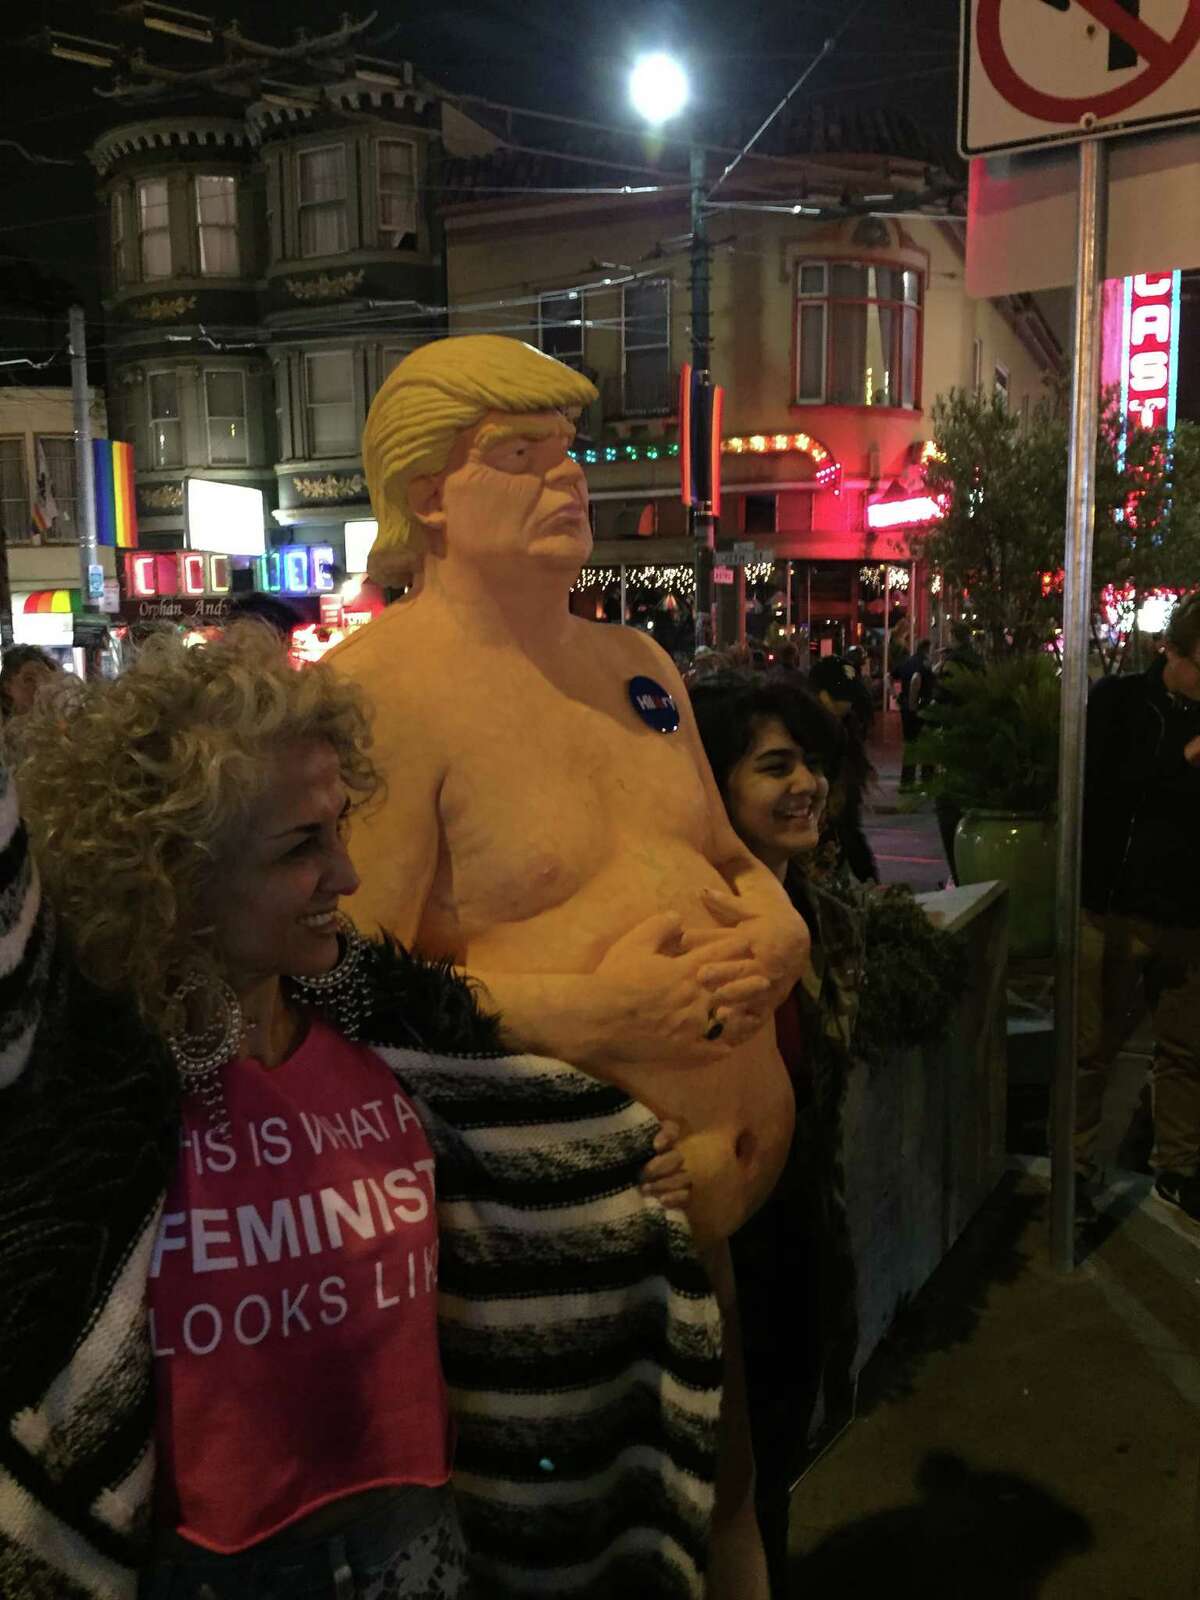 Naked Donald Trump statue in San Francisco’s Castro District drew crowds late into Thursday night before it was removed by the city’s Department of Public Works early Friday morning.